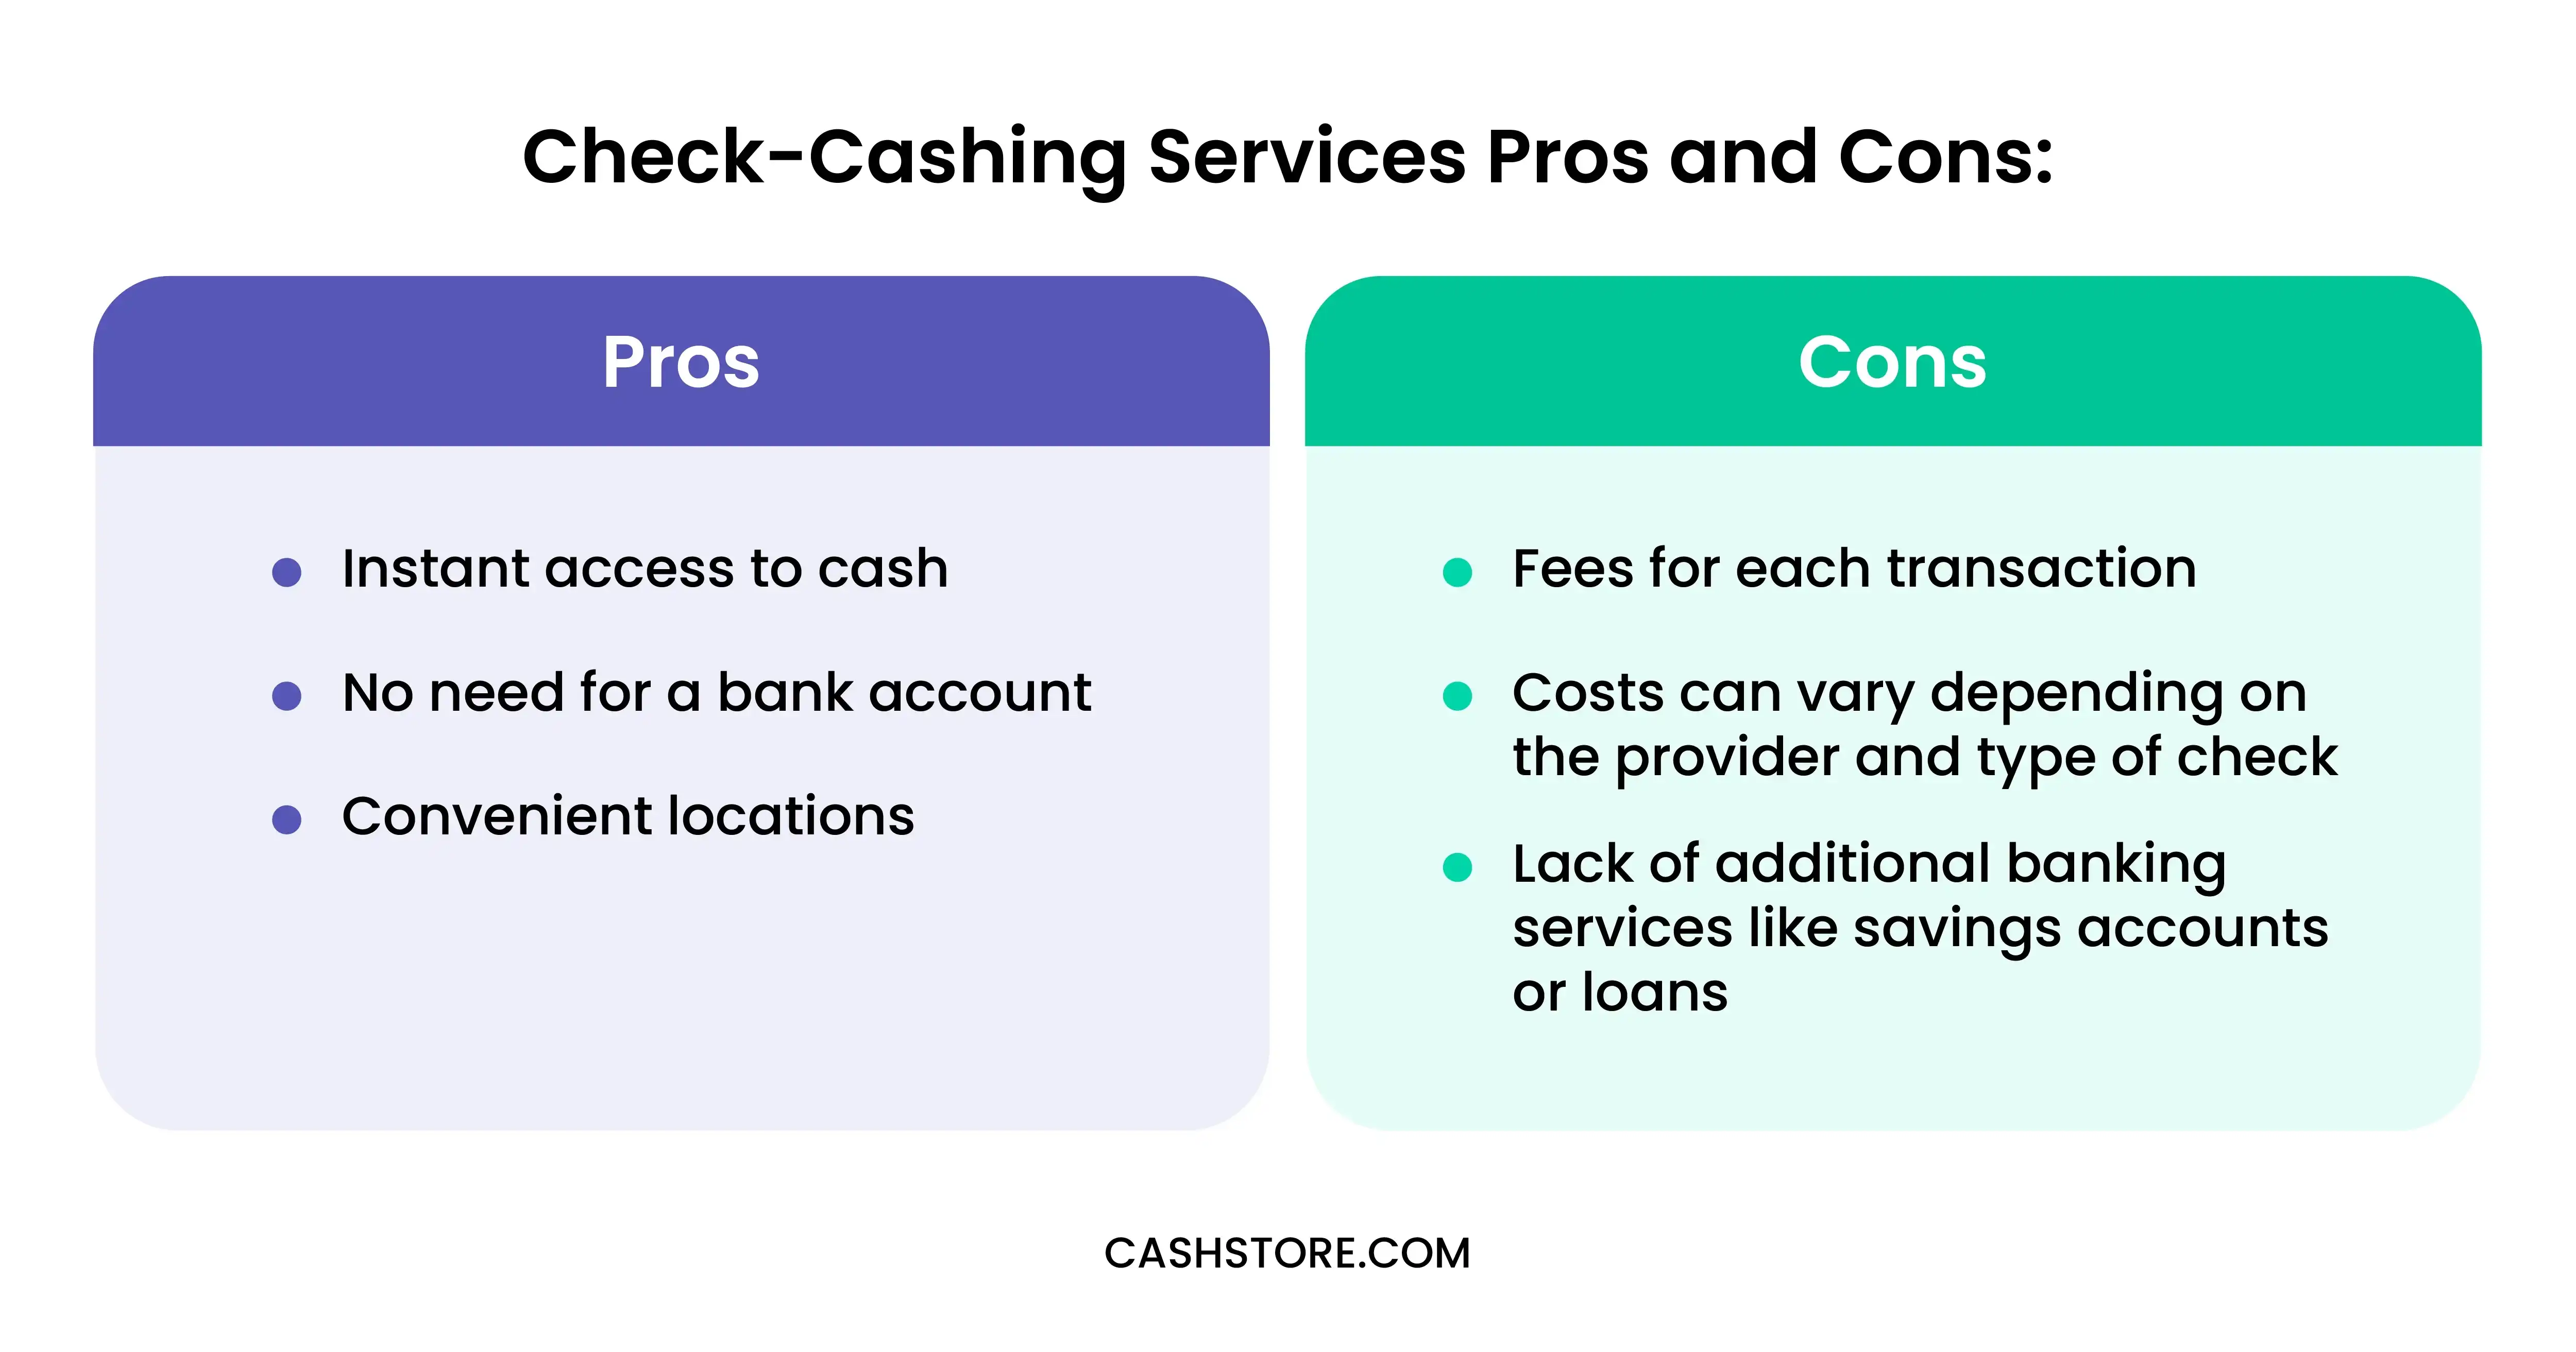 Check-Cashing Services Pros and Cons